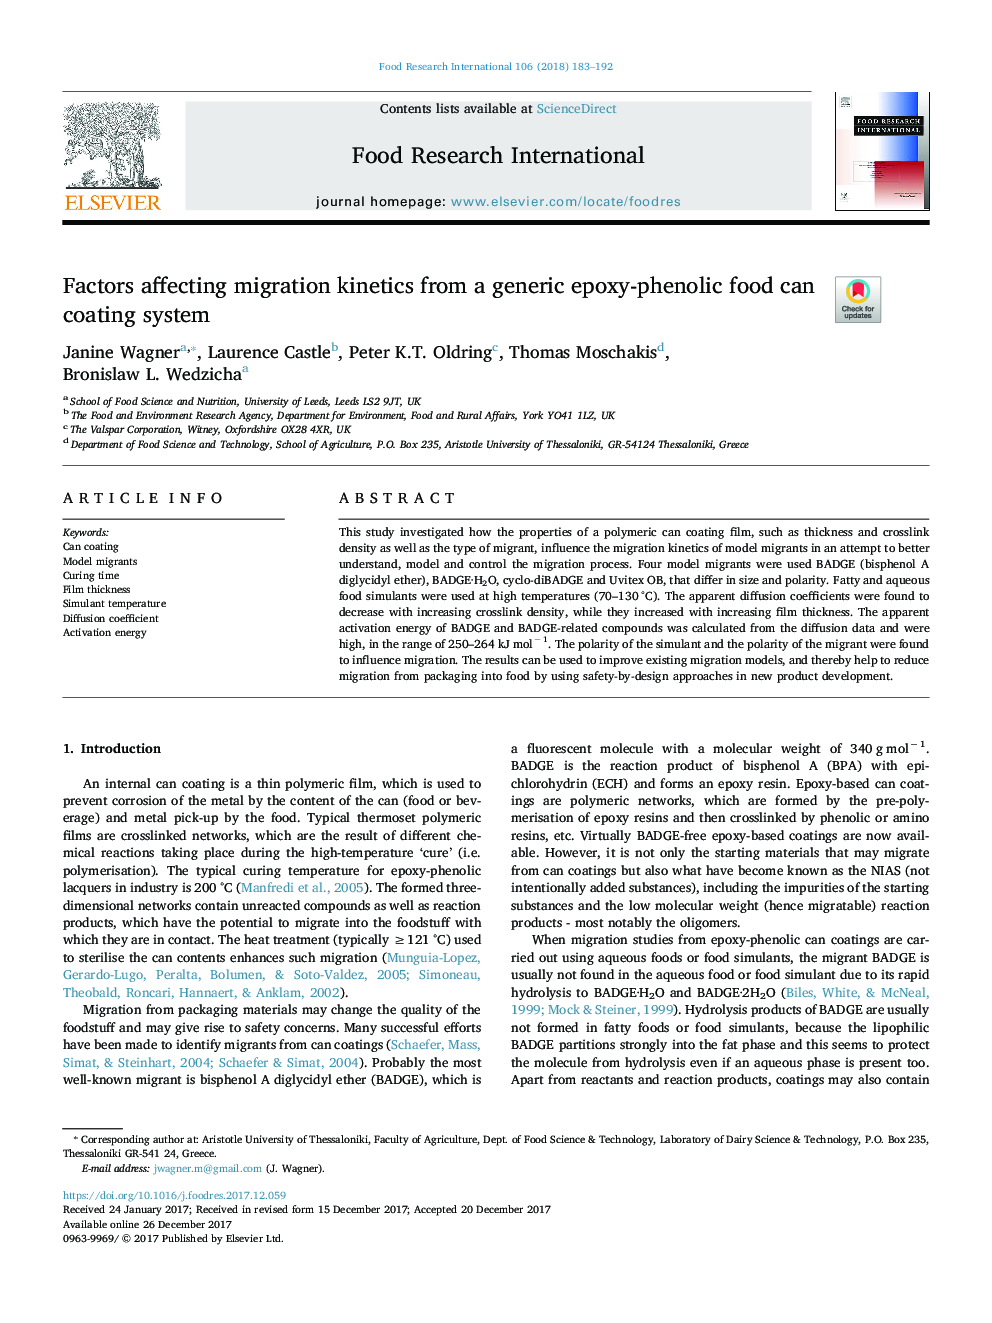 Factors affecting migration kinetics from a generic epoxy-phenolic food can coating system